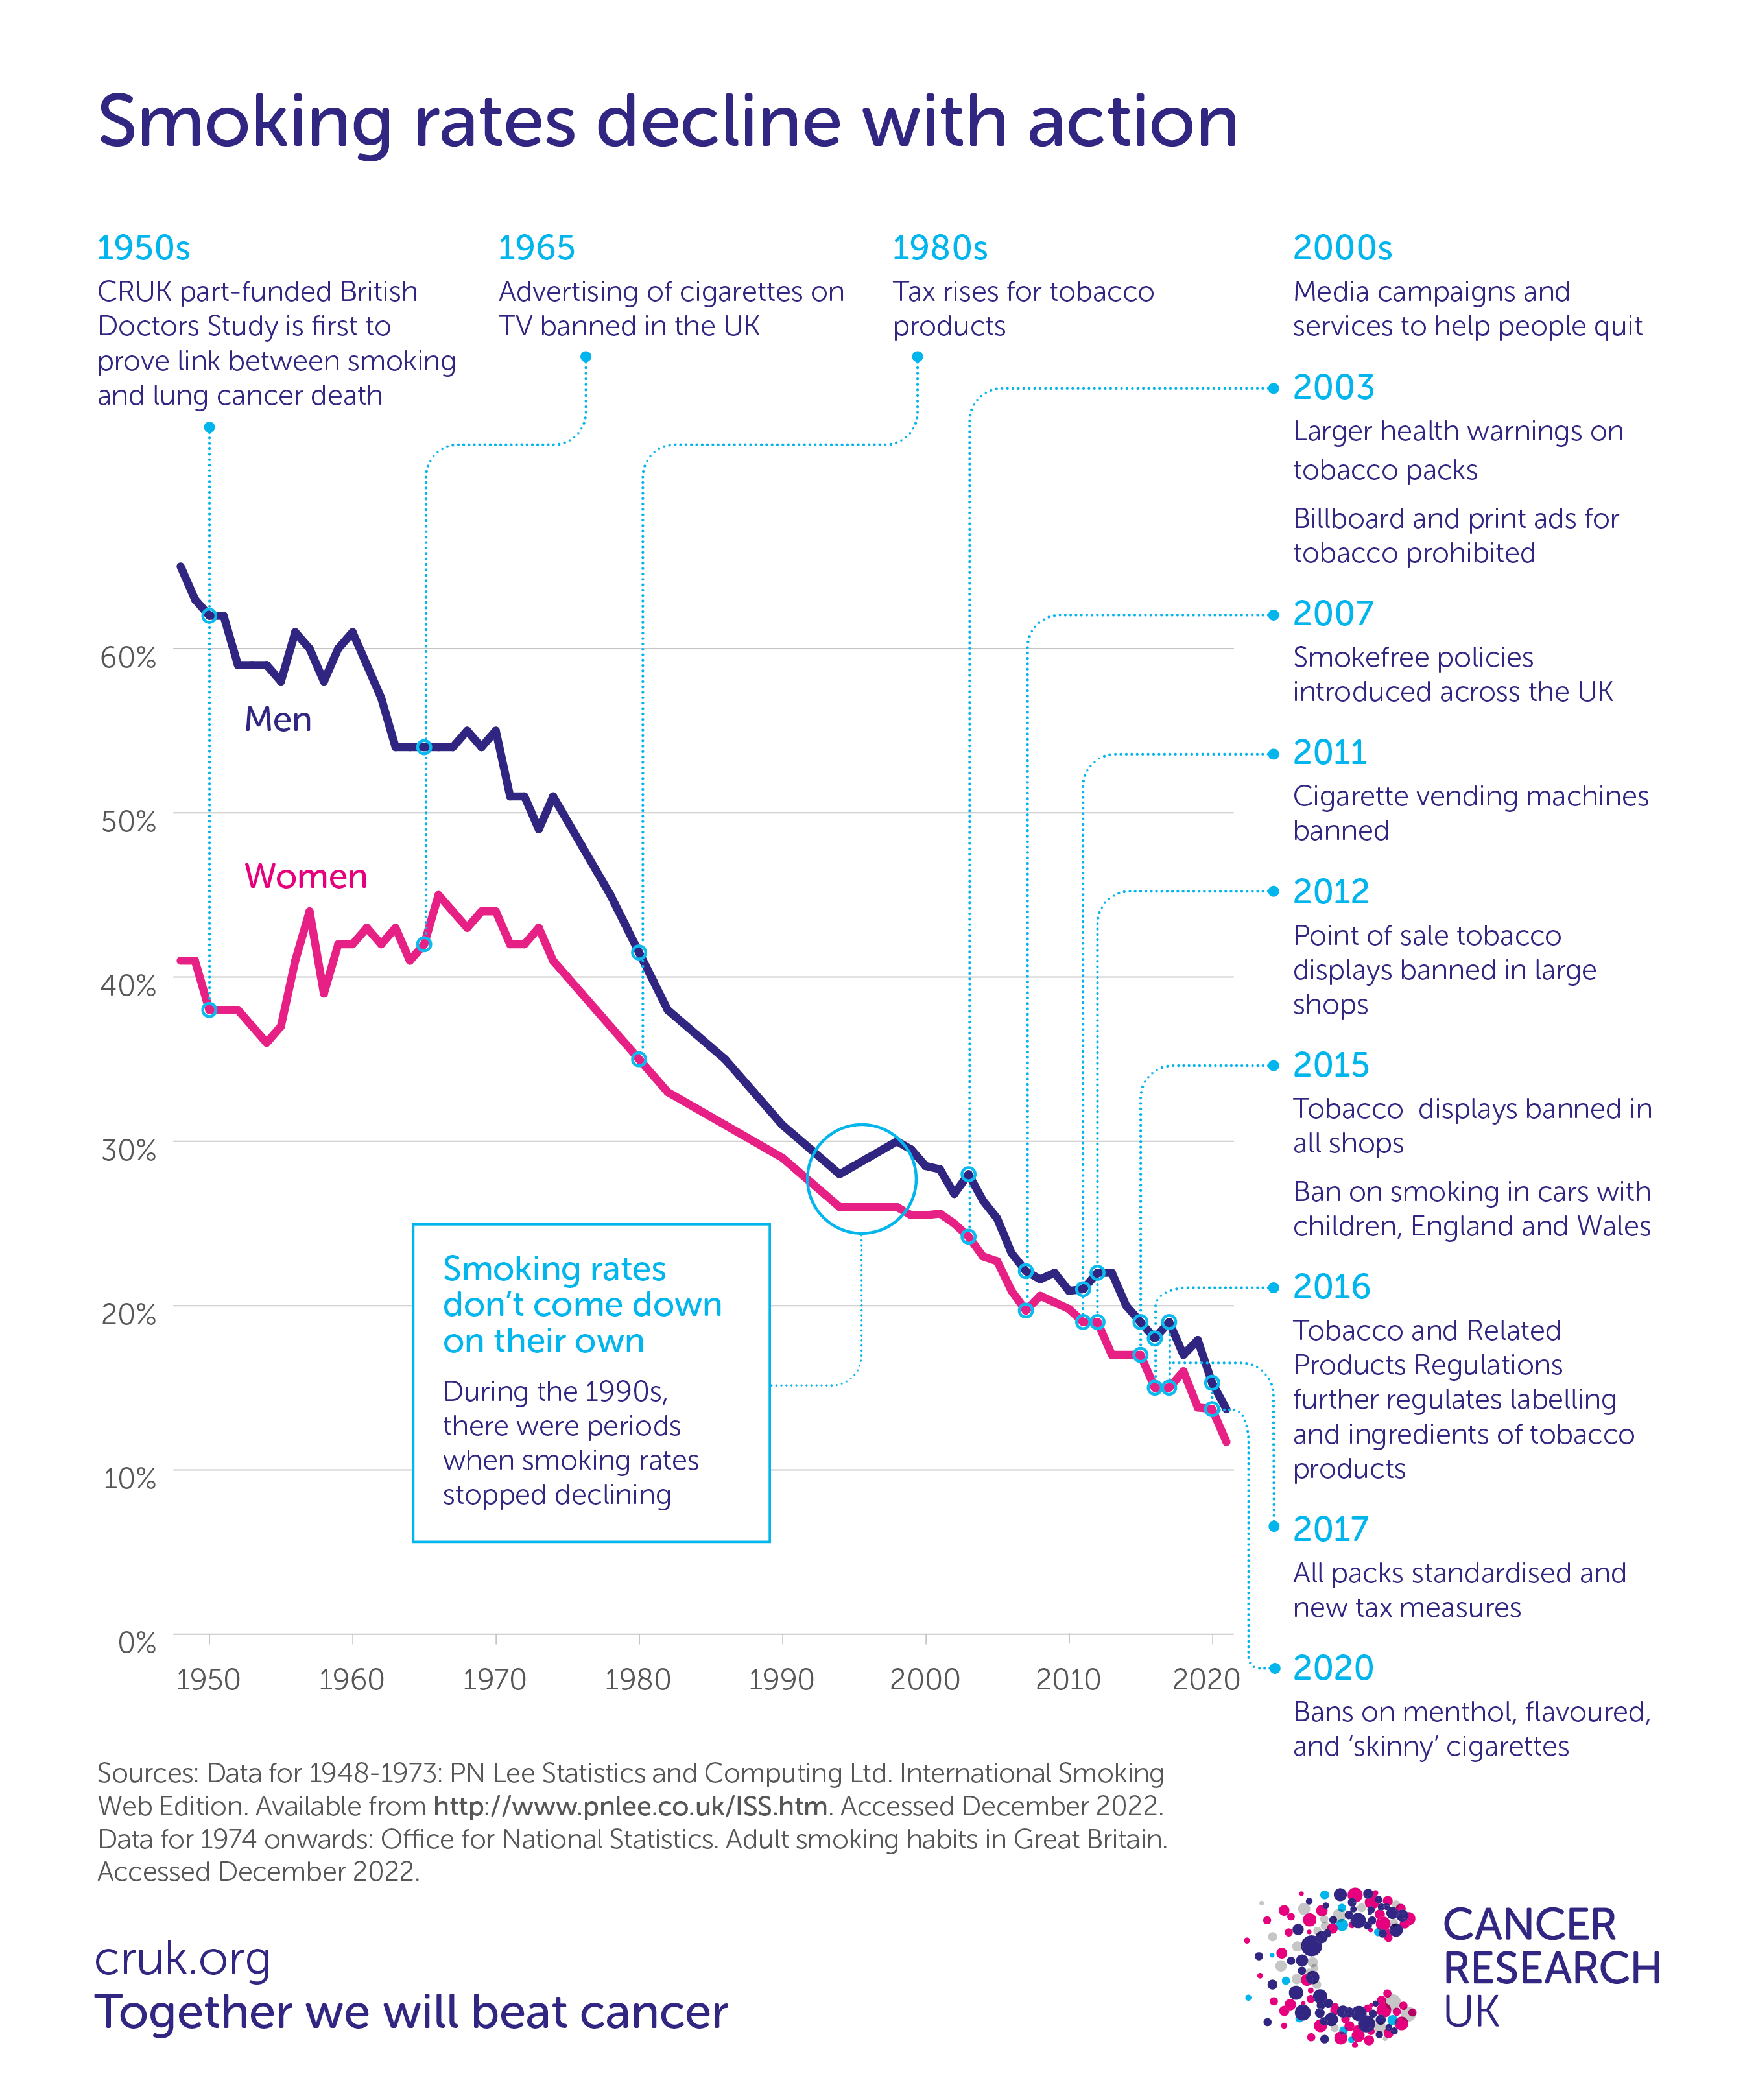 A graph showing the decline in smoking rates with action since the 1950s